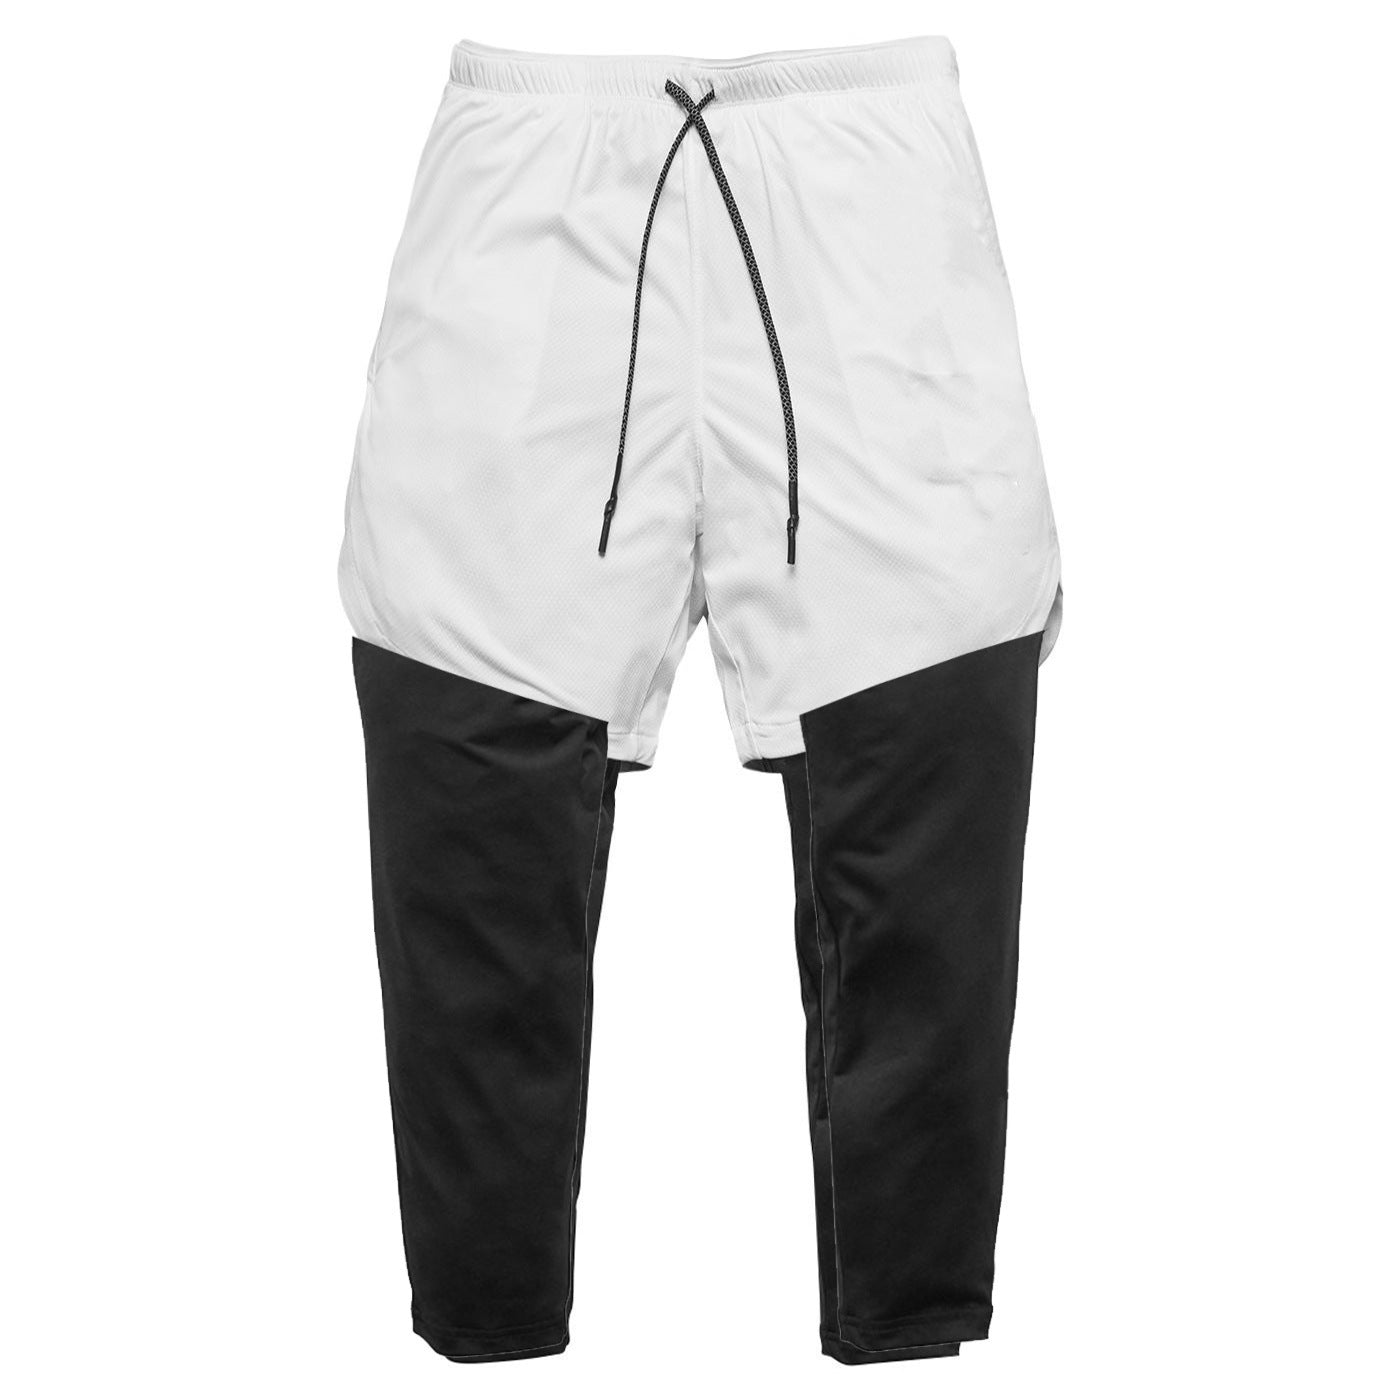 Cross-border exclusively for summer new men's sports shorts mesh double-layer fitness pants cropped pants